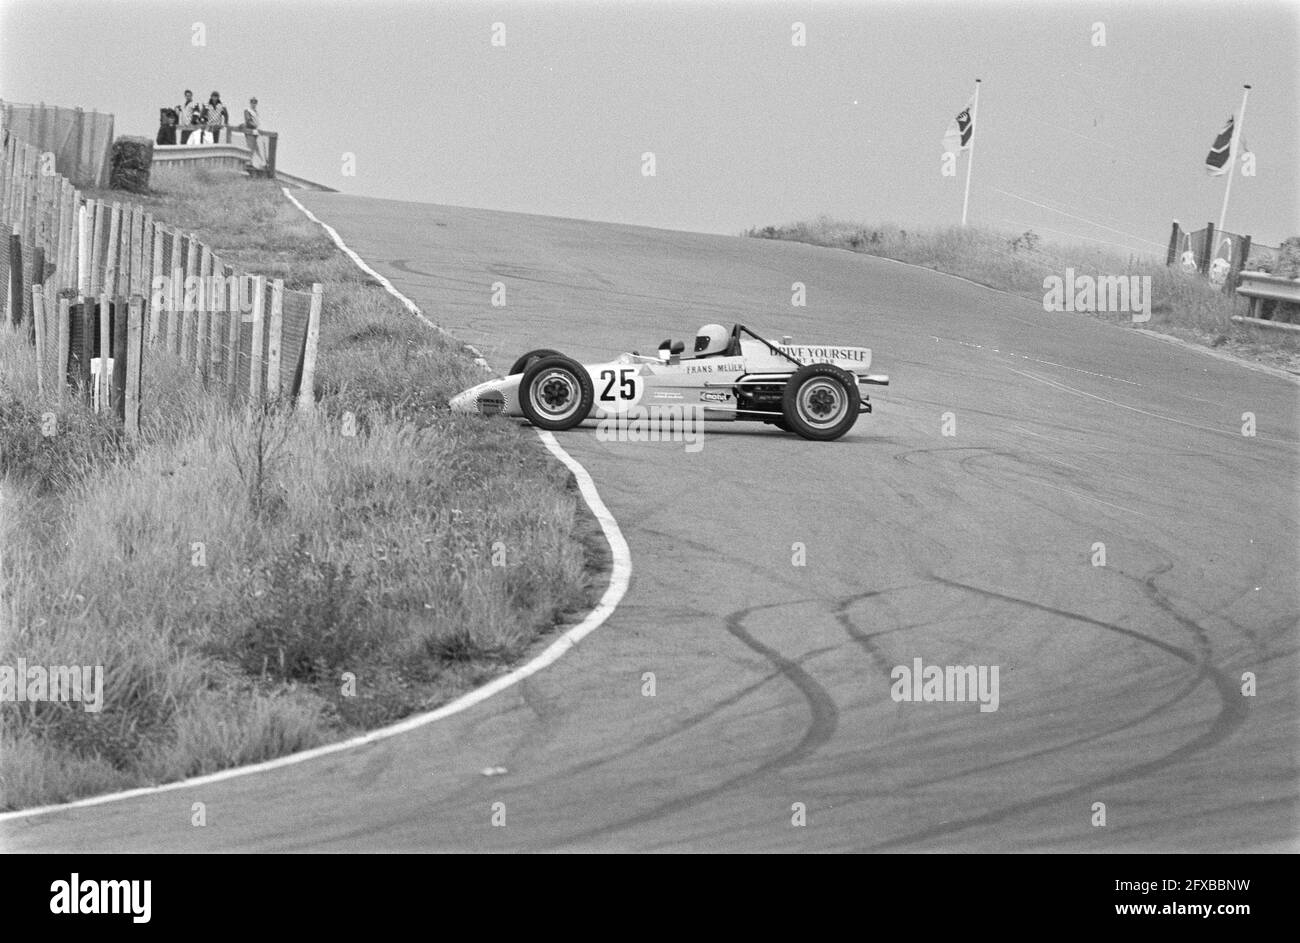 International Formula Vee car racing, Zandvoort, August 8, 1971, AUTORACES, The Netherlands, 20th century press agency photo, news to remember, documentary, historic photography 1945-1990, visual stories, human history of the Twentieth Century, capturing moments in time Stock Photo